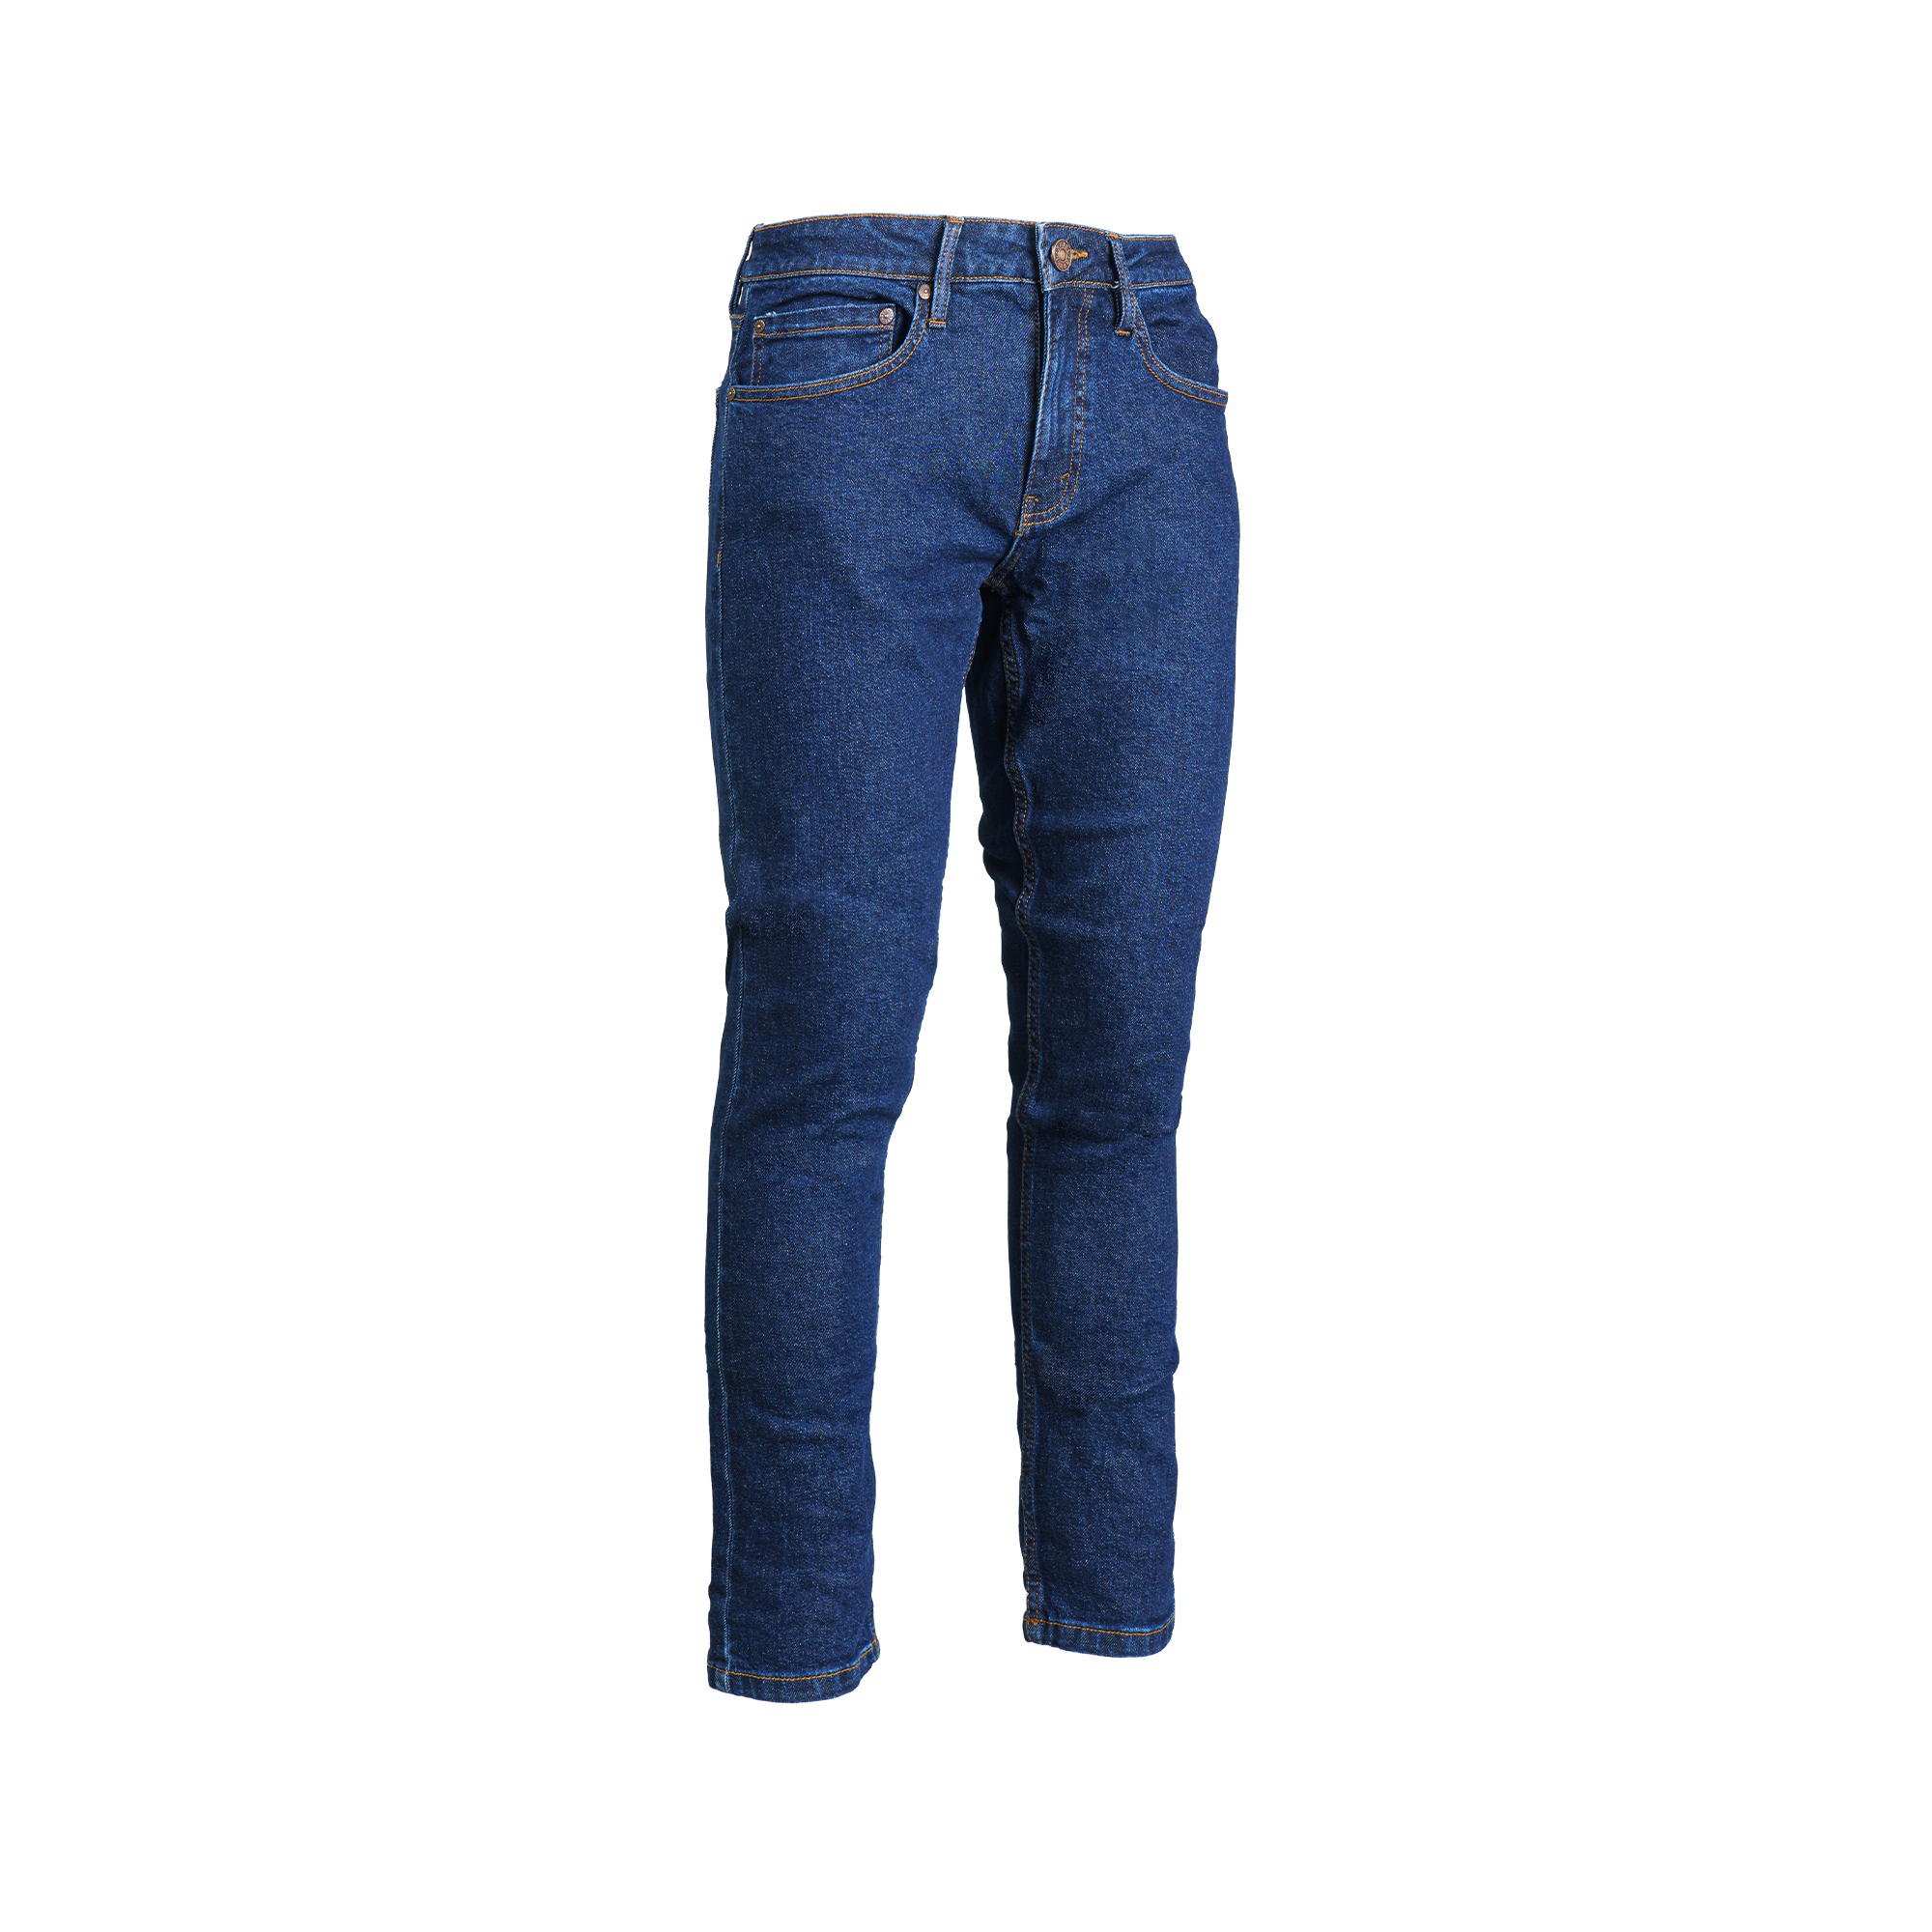 Work_Wear_Mens_Jeans_Dark_Blue_Front_Angle